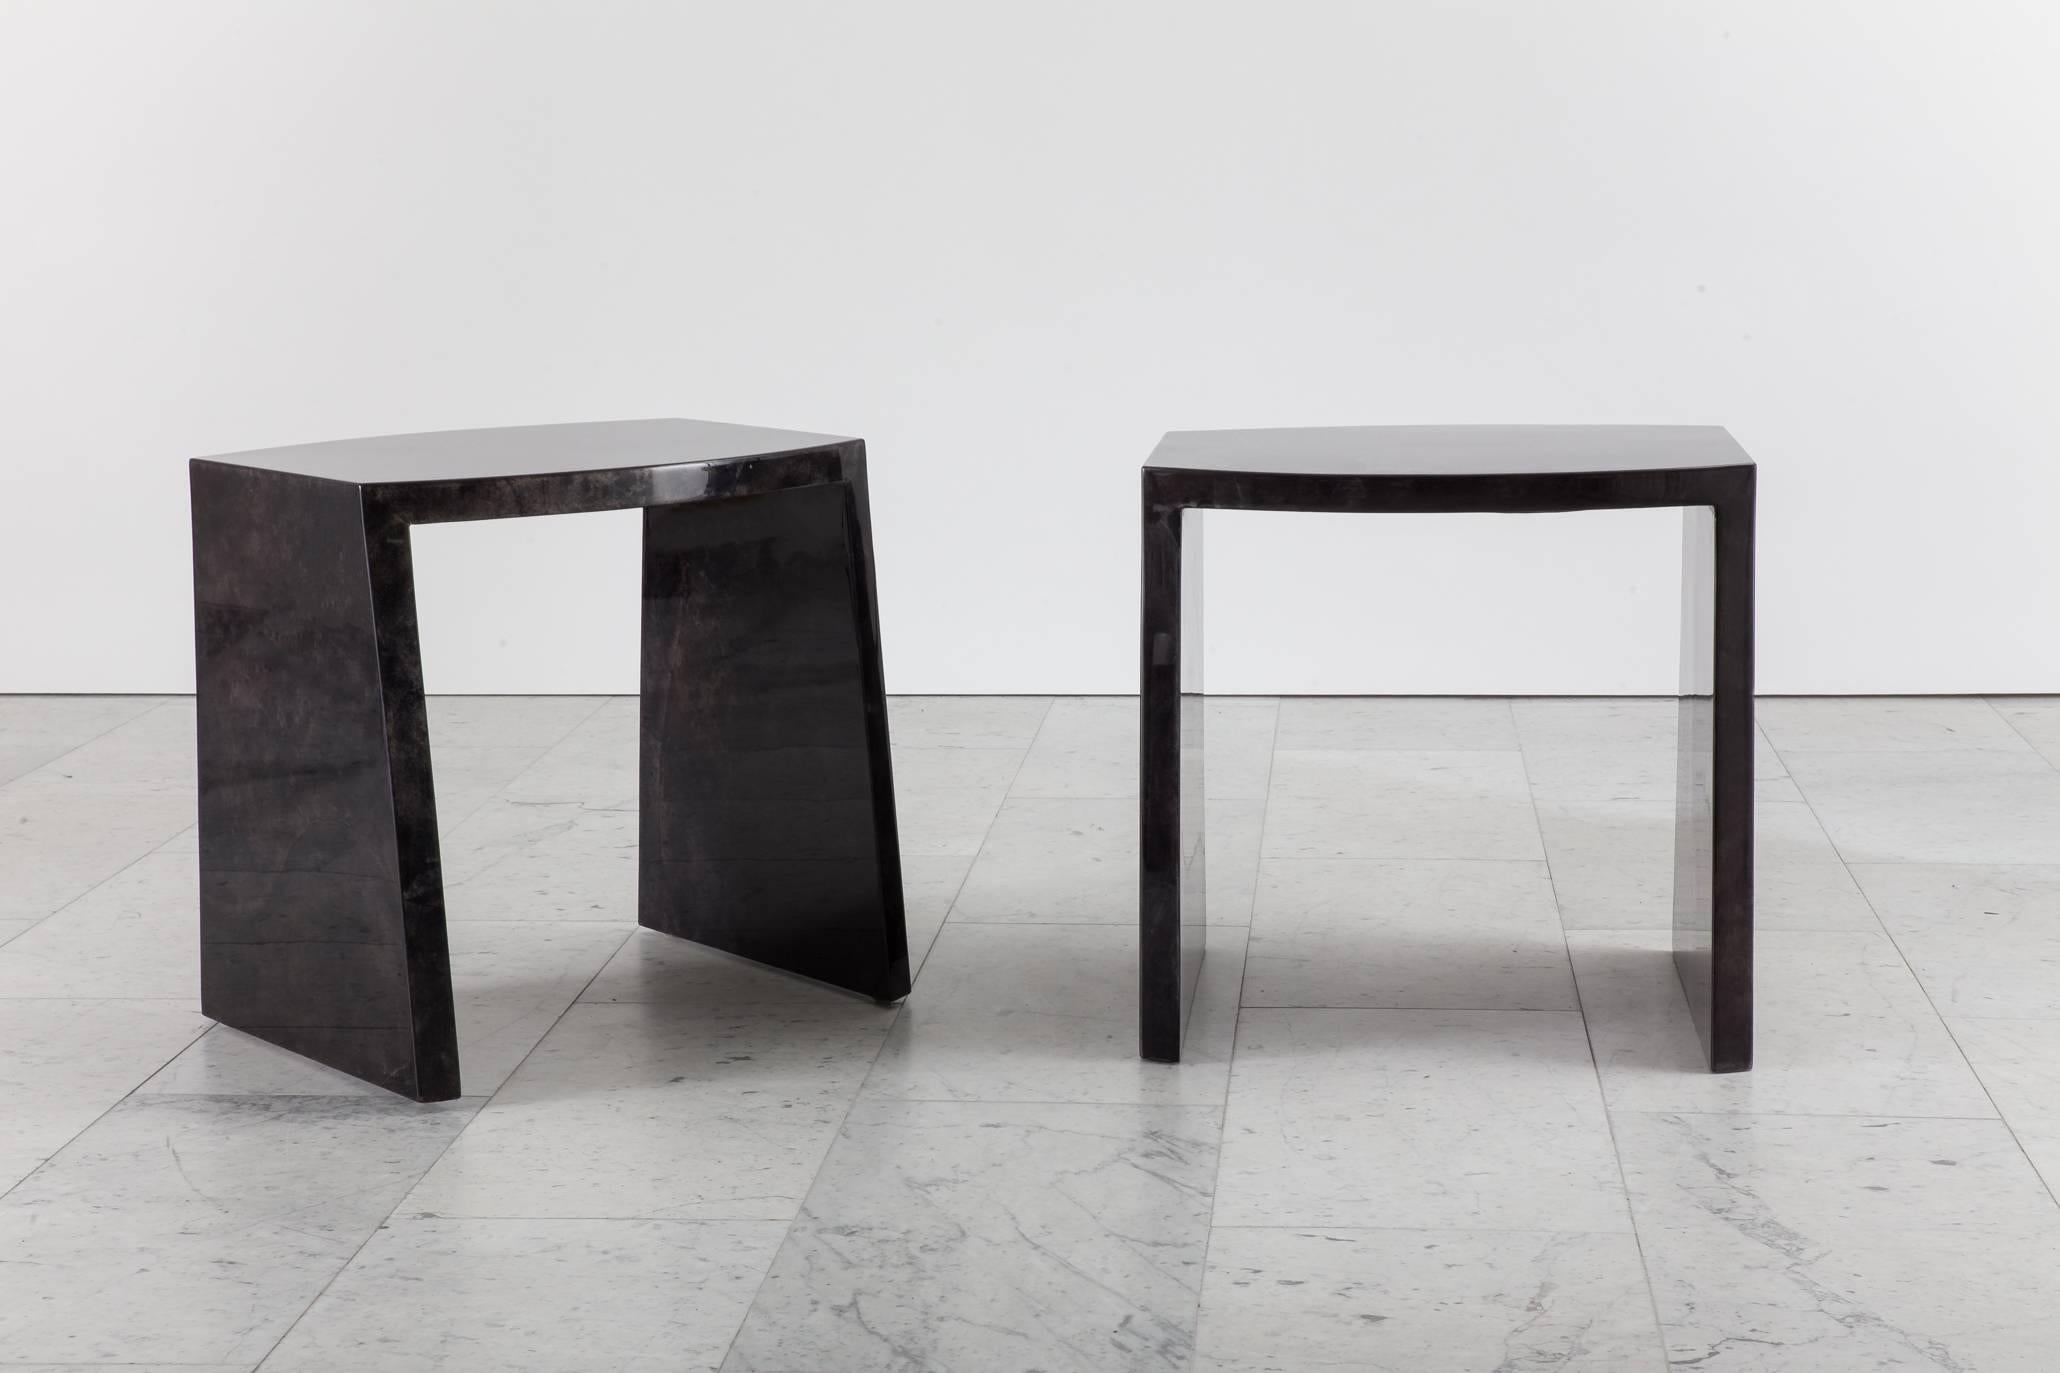 The elegant shape of Ron Seff’s iconic “Ritz” table meets the artist’s masterful use of exotic materials and finishes. Made of black goat skin and finished in lacquer, the side tables are once sculptural as they are practical.

Todd Merrill Studio